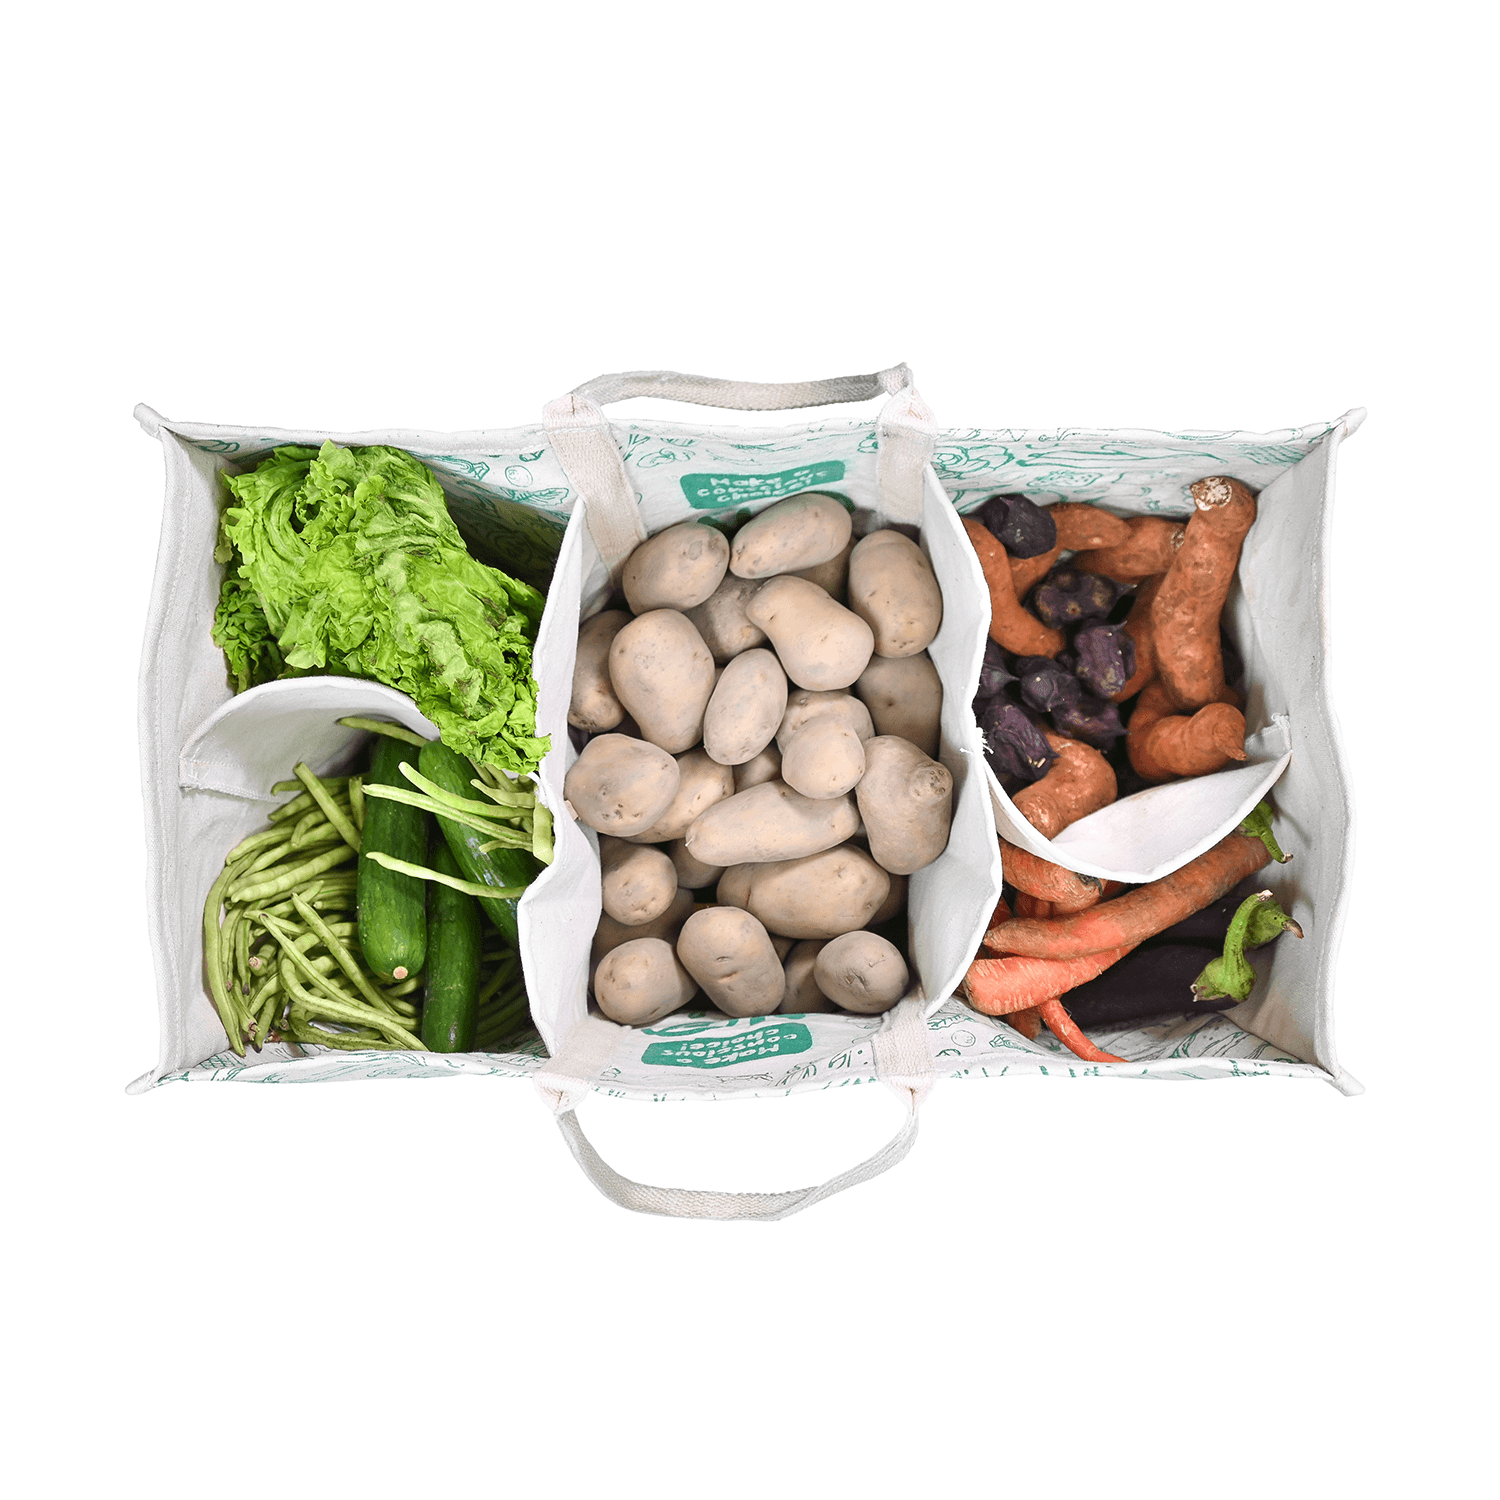 Grocery Bag made with Heavy Duty Canvas Cloth - Thoughtfully designed, reusable shopping bag with two printed sides - Satopradhan